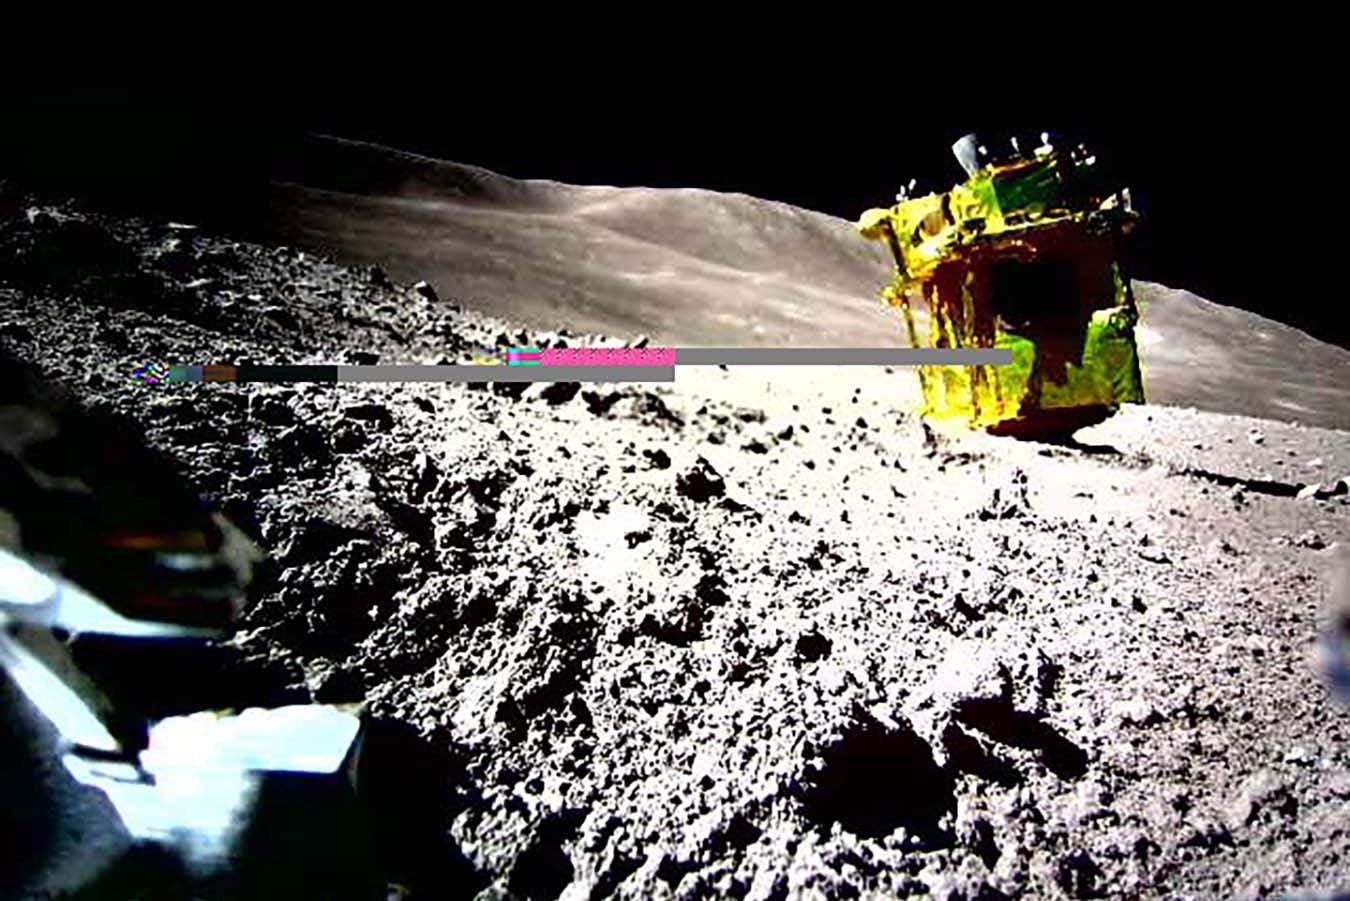 Japan’s rolling and hopping lunar rovers send back images of the moon